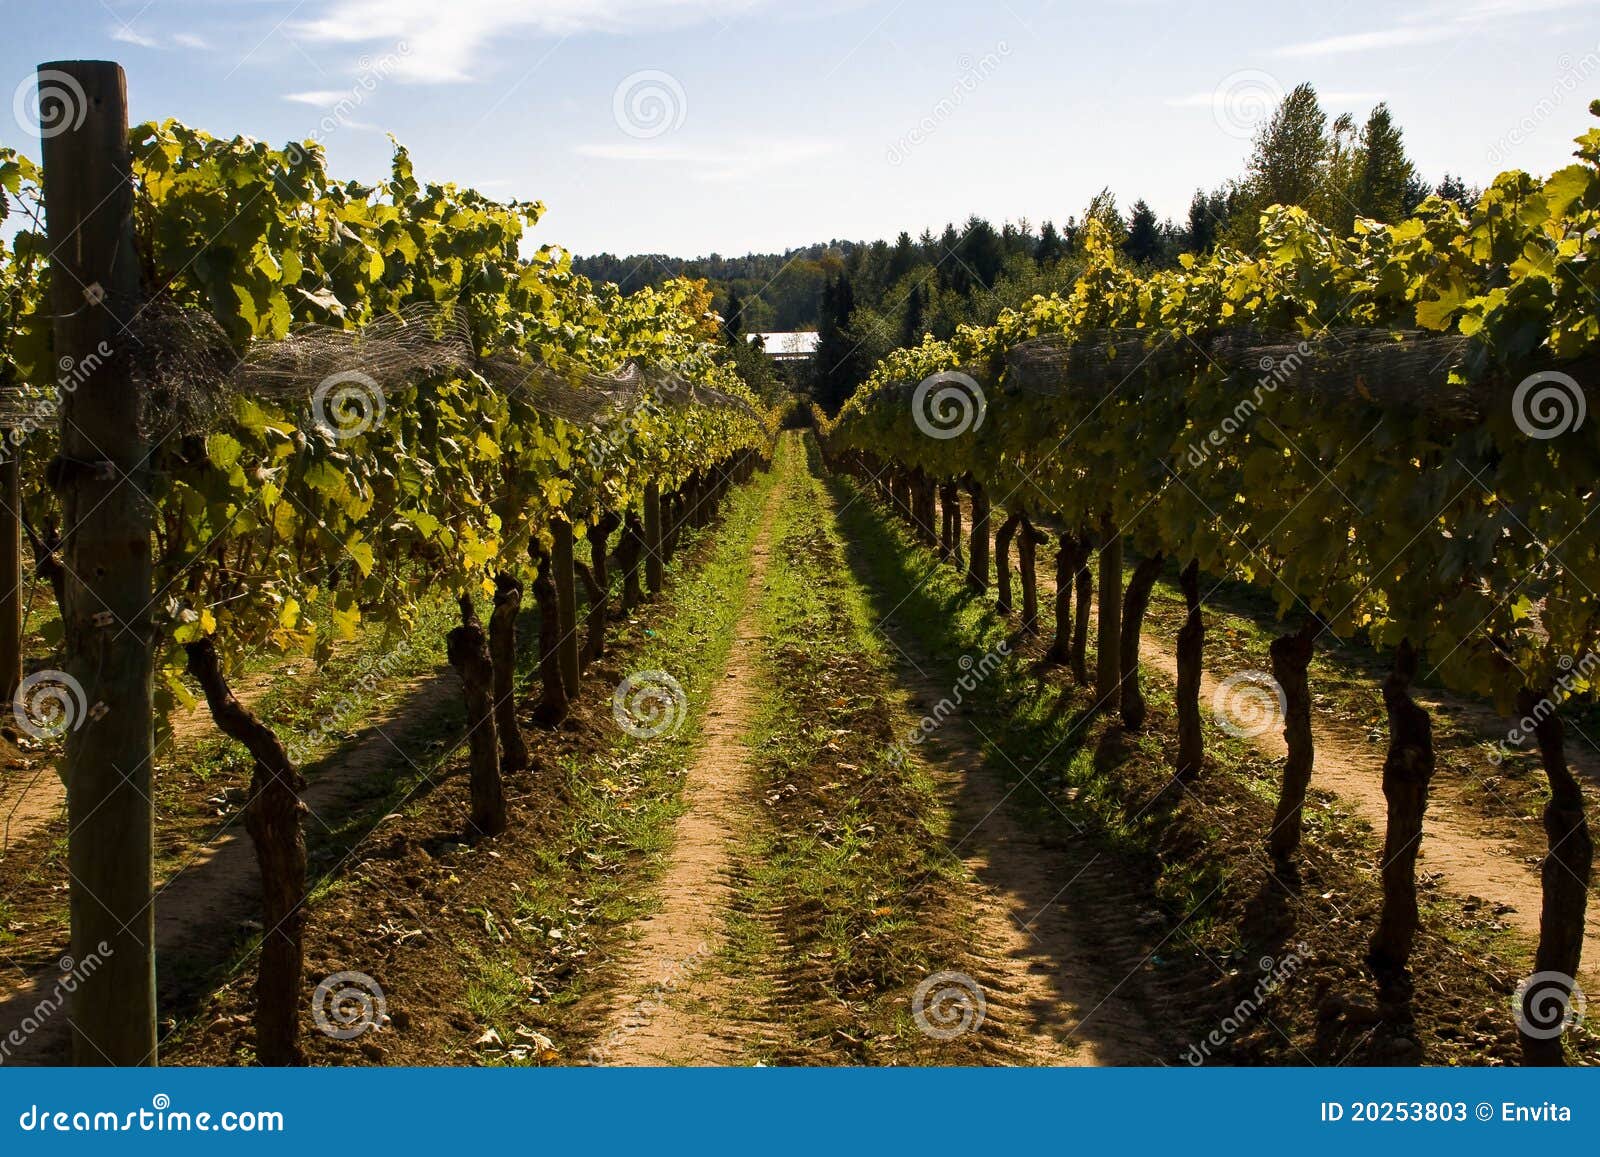 Vineyard On A Sunny Day Stock Image Image Of Mellow 20253803